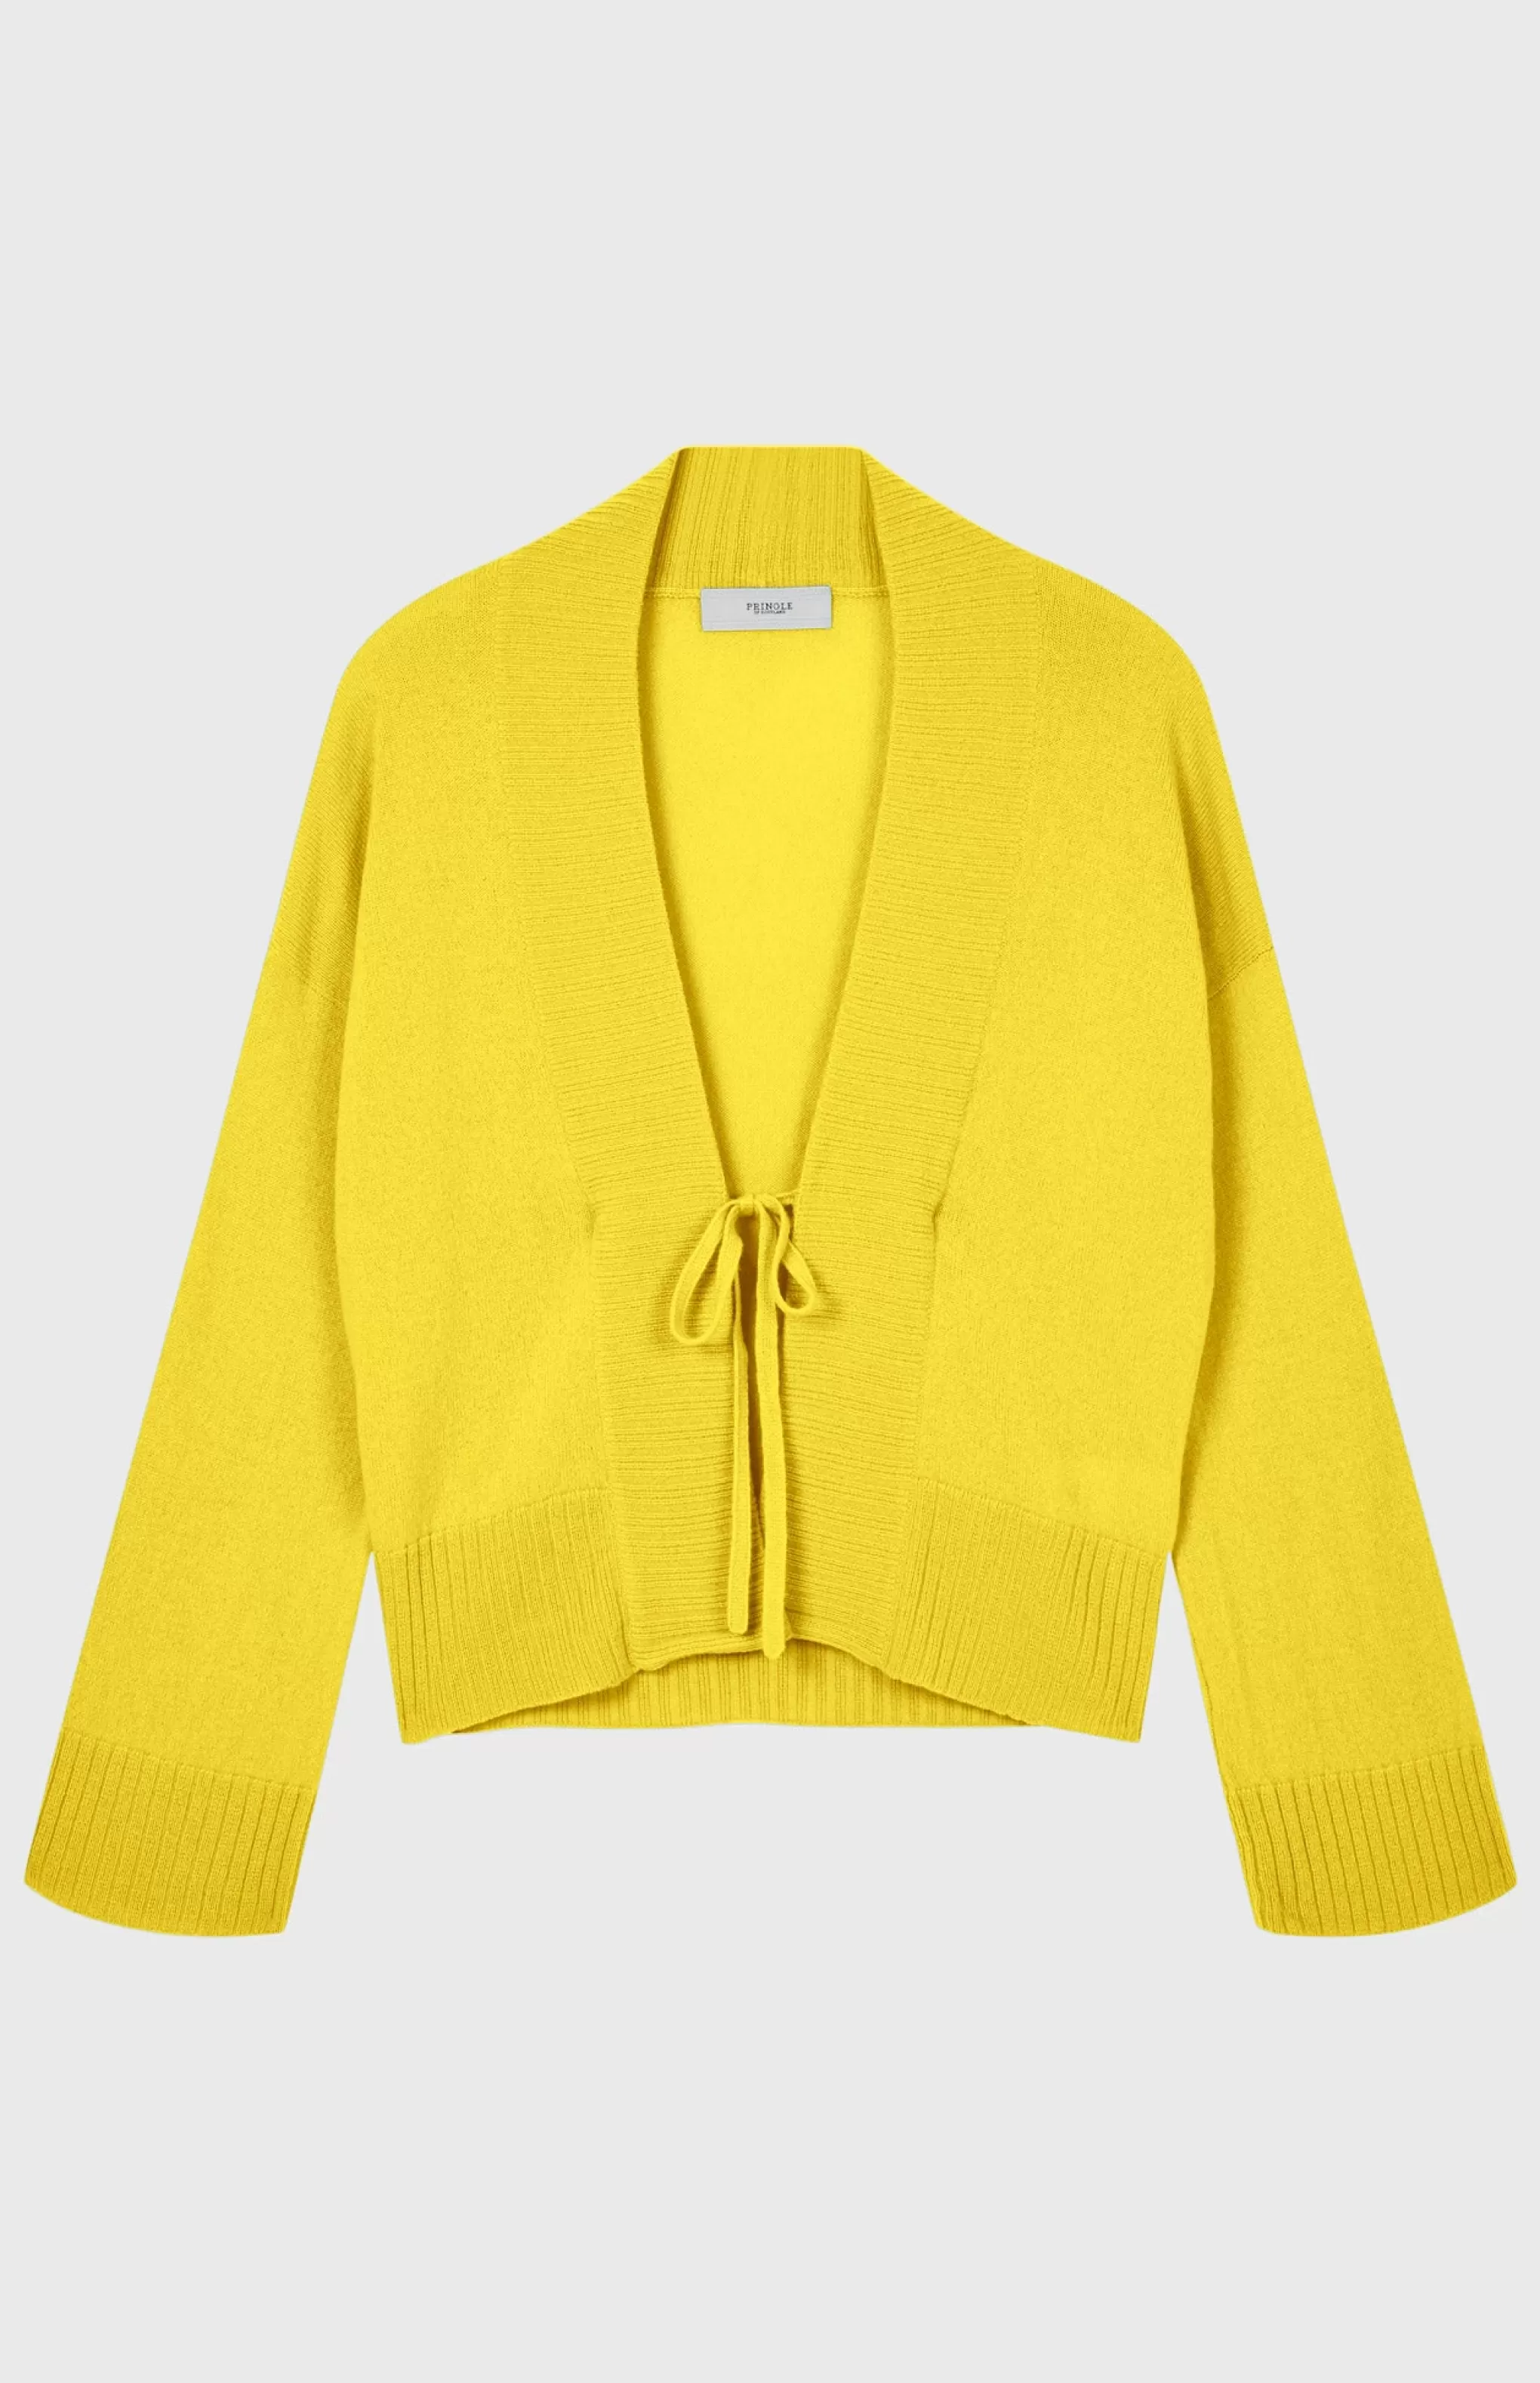 Clearance Women's Lightweight Cashmere Open Cardigan With Tie In Bright Yellow Men/Women Cardigans